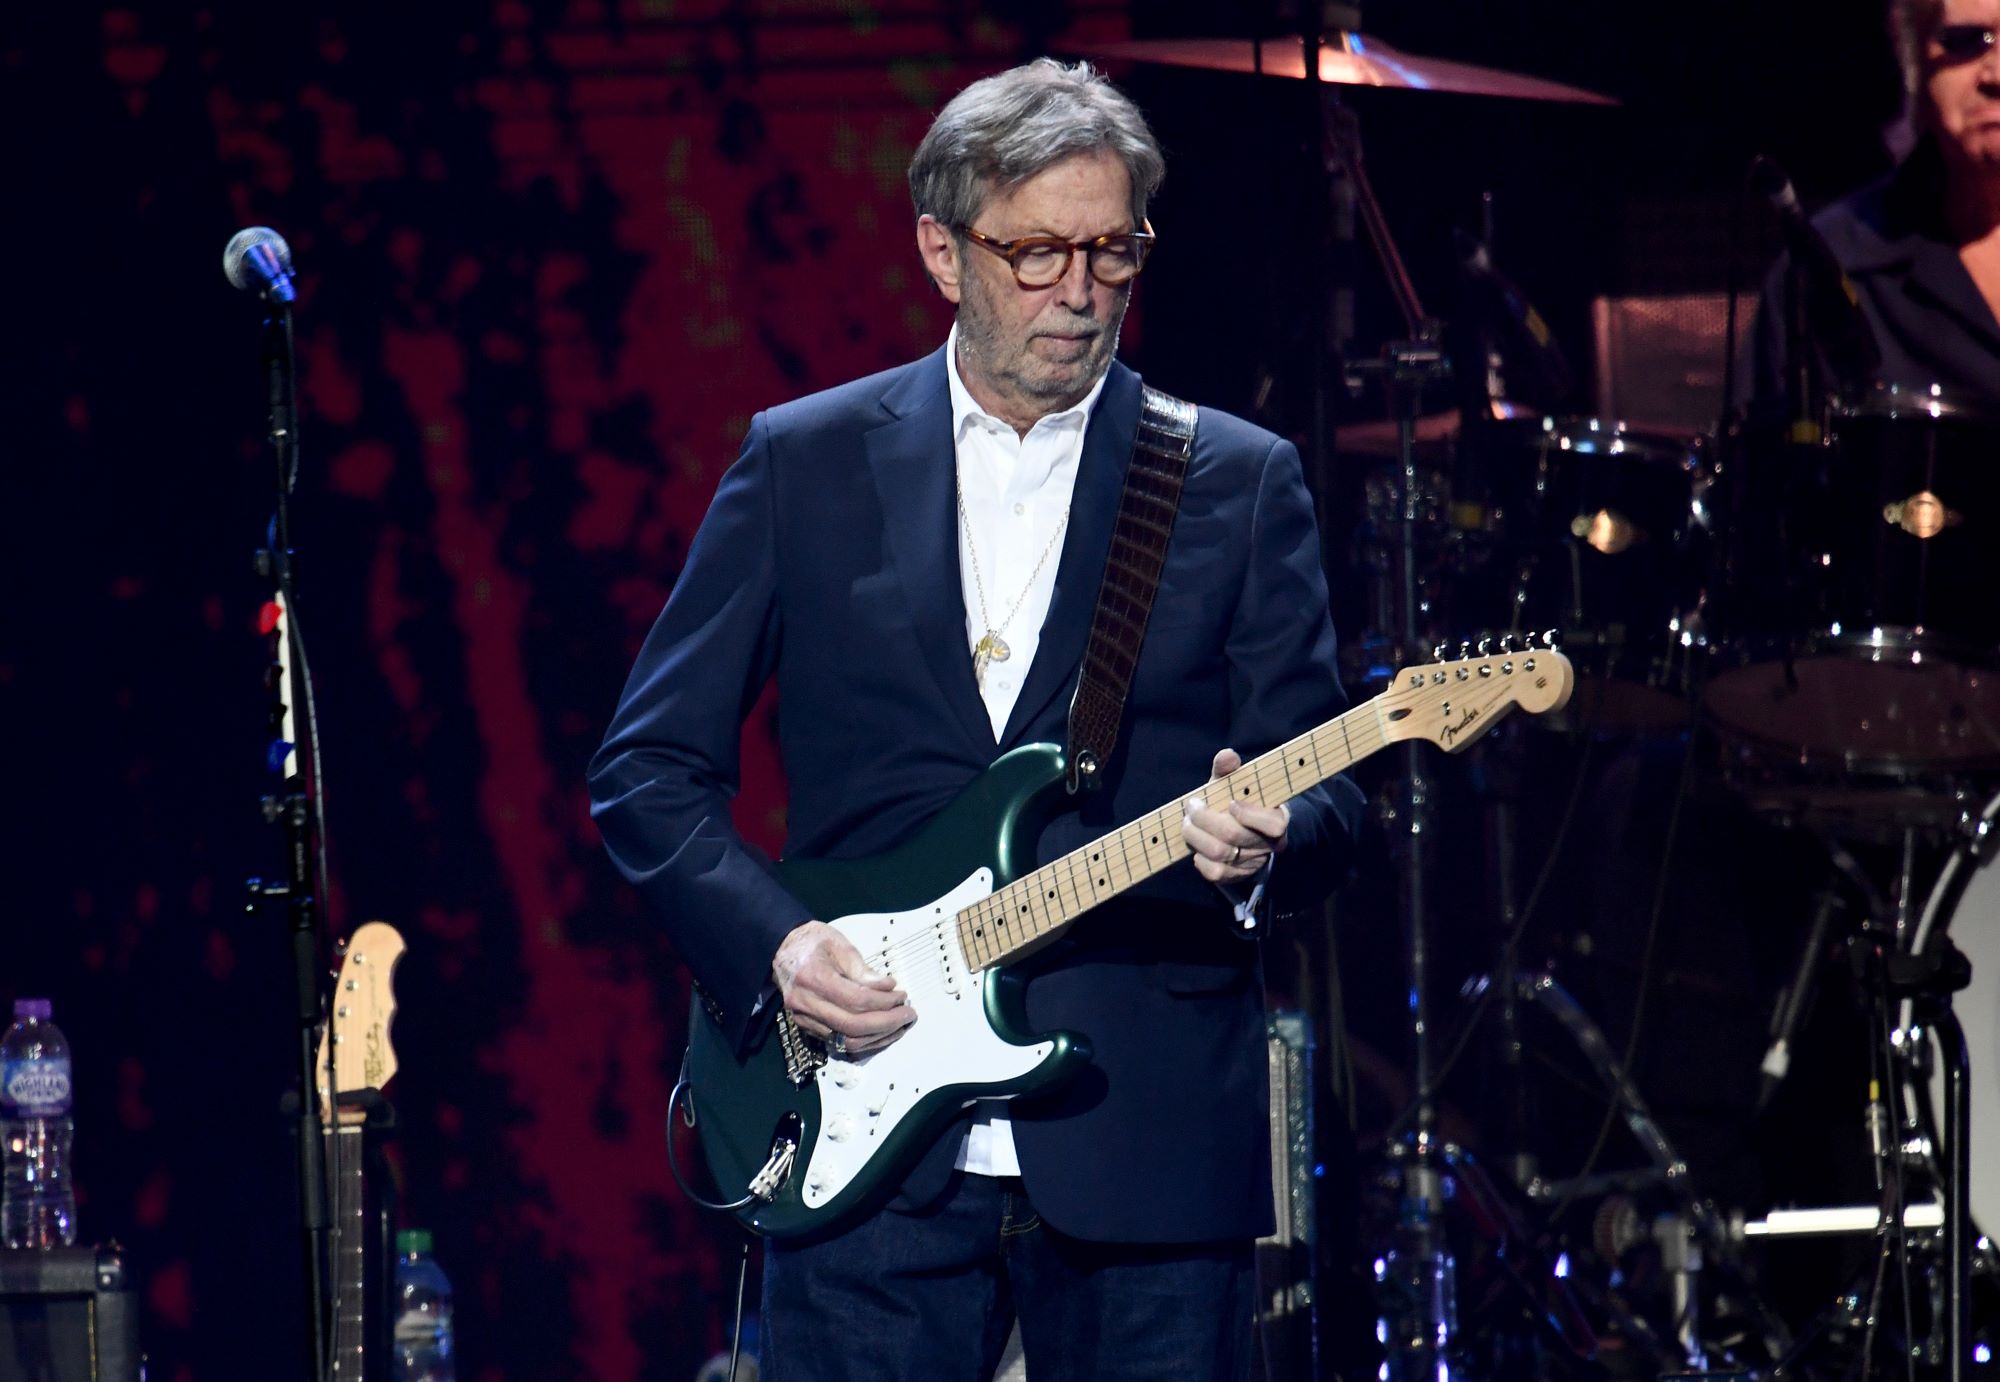 Eric Clapton playing a guitar at one of his concerts wearing a suit in front of a black and red background.